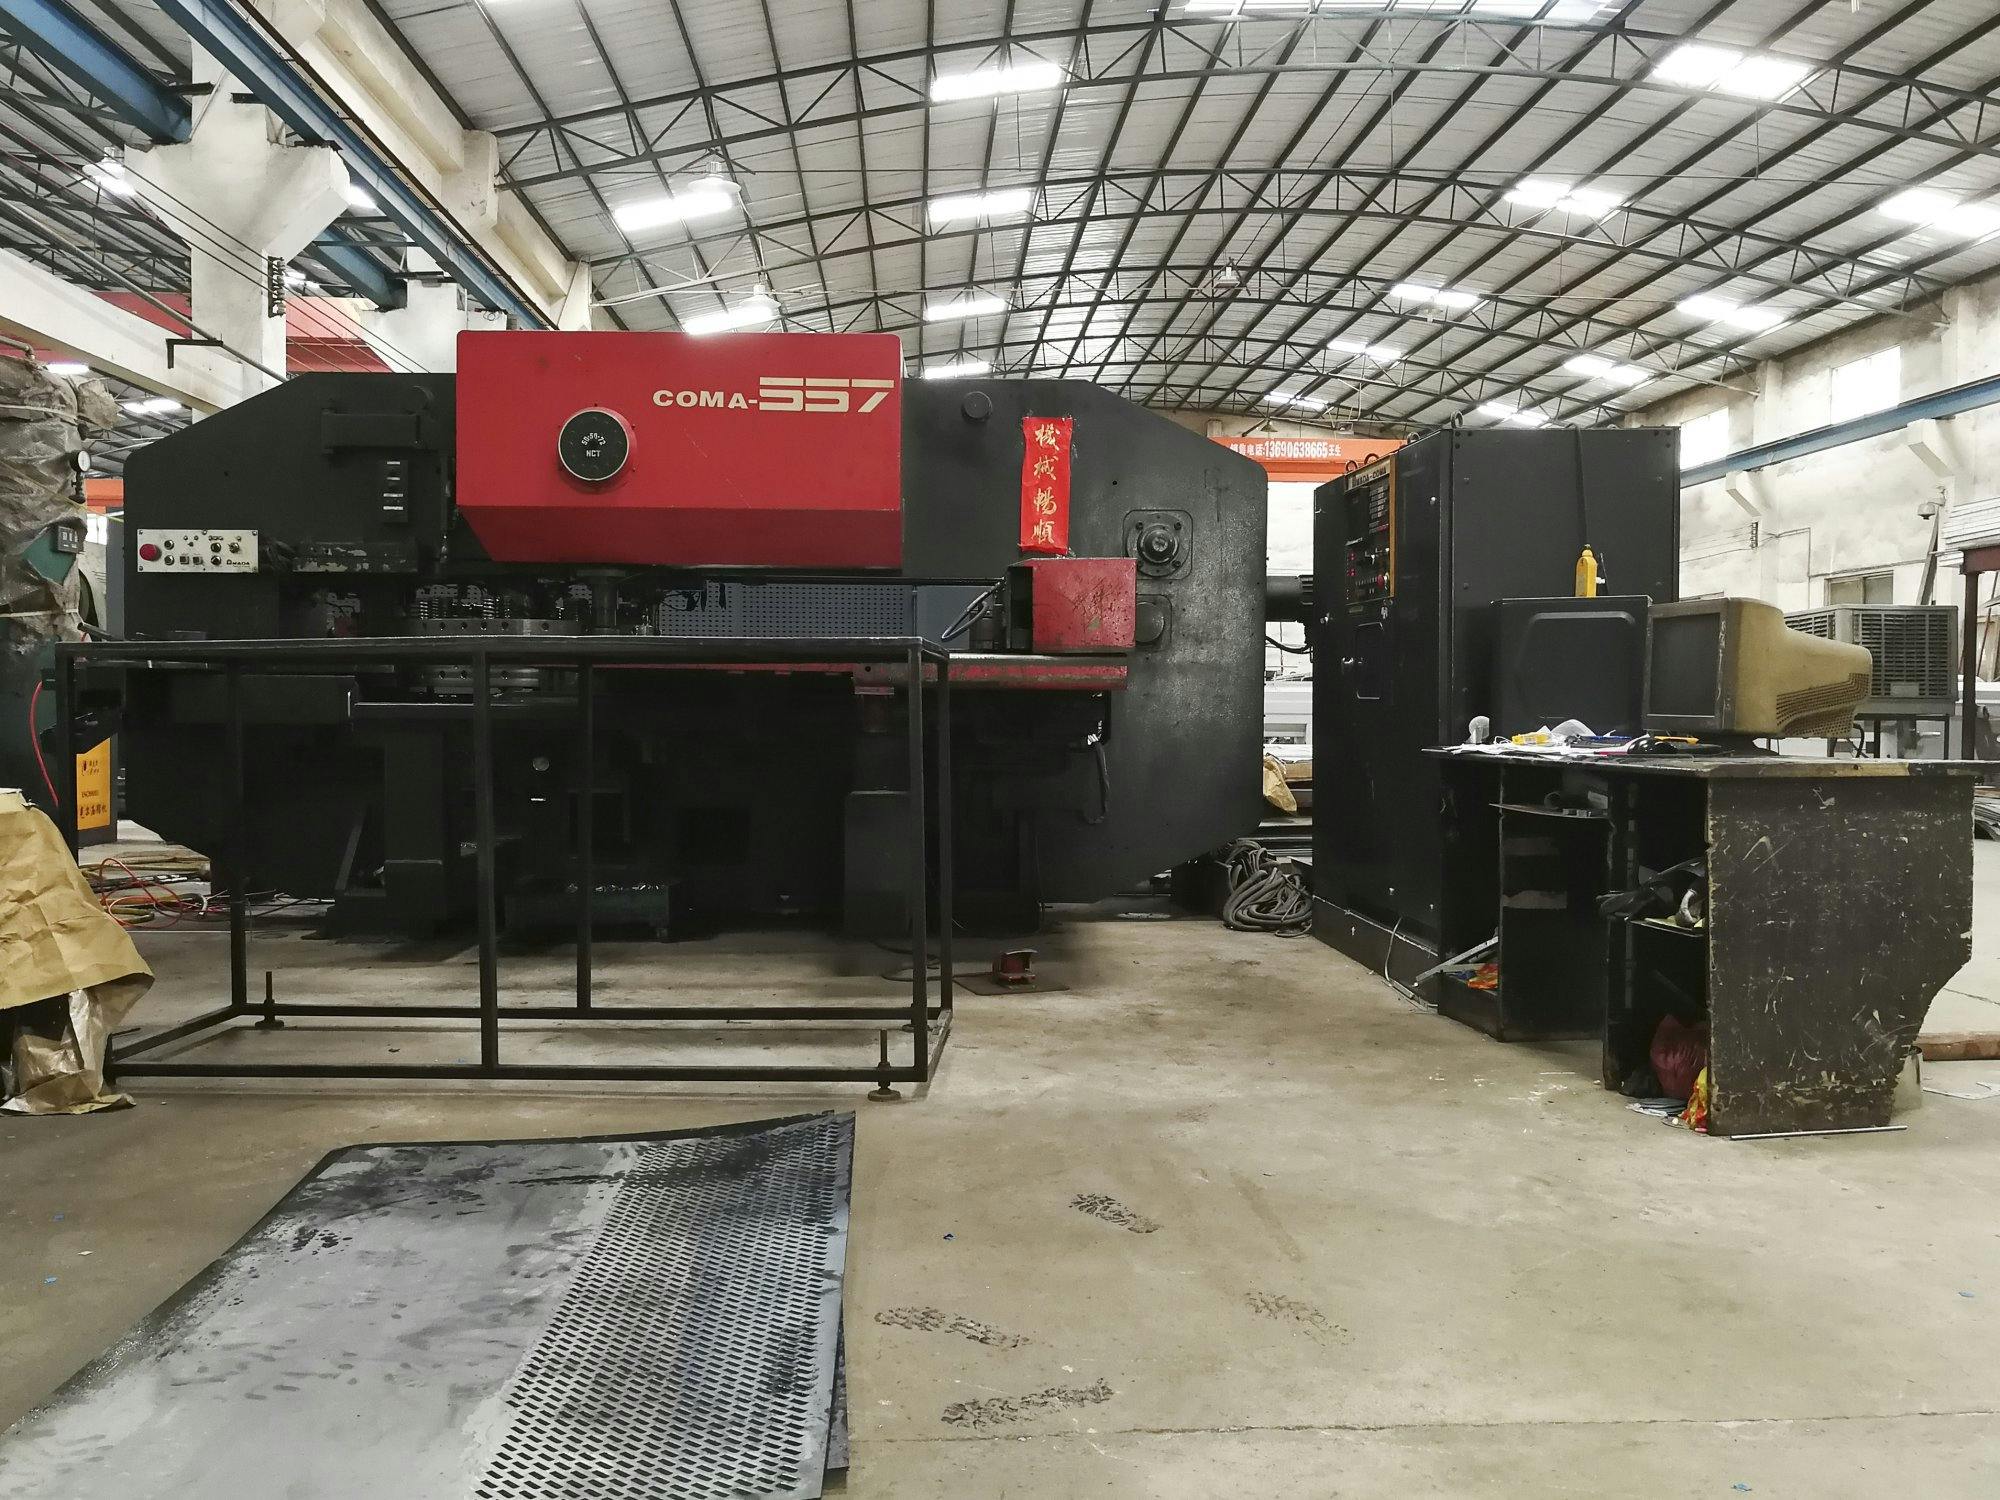 Front view of AMADA Coma 557 machine